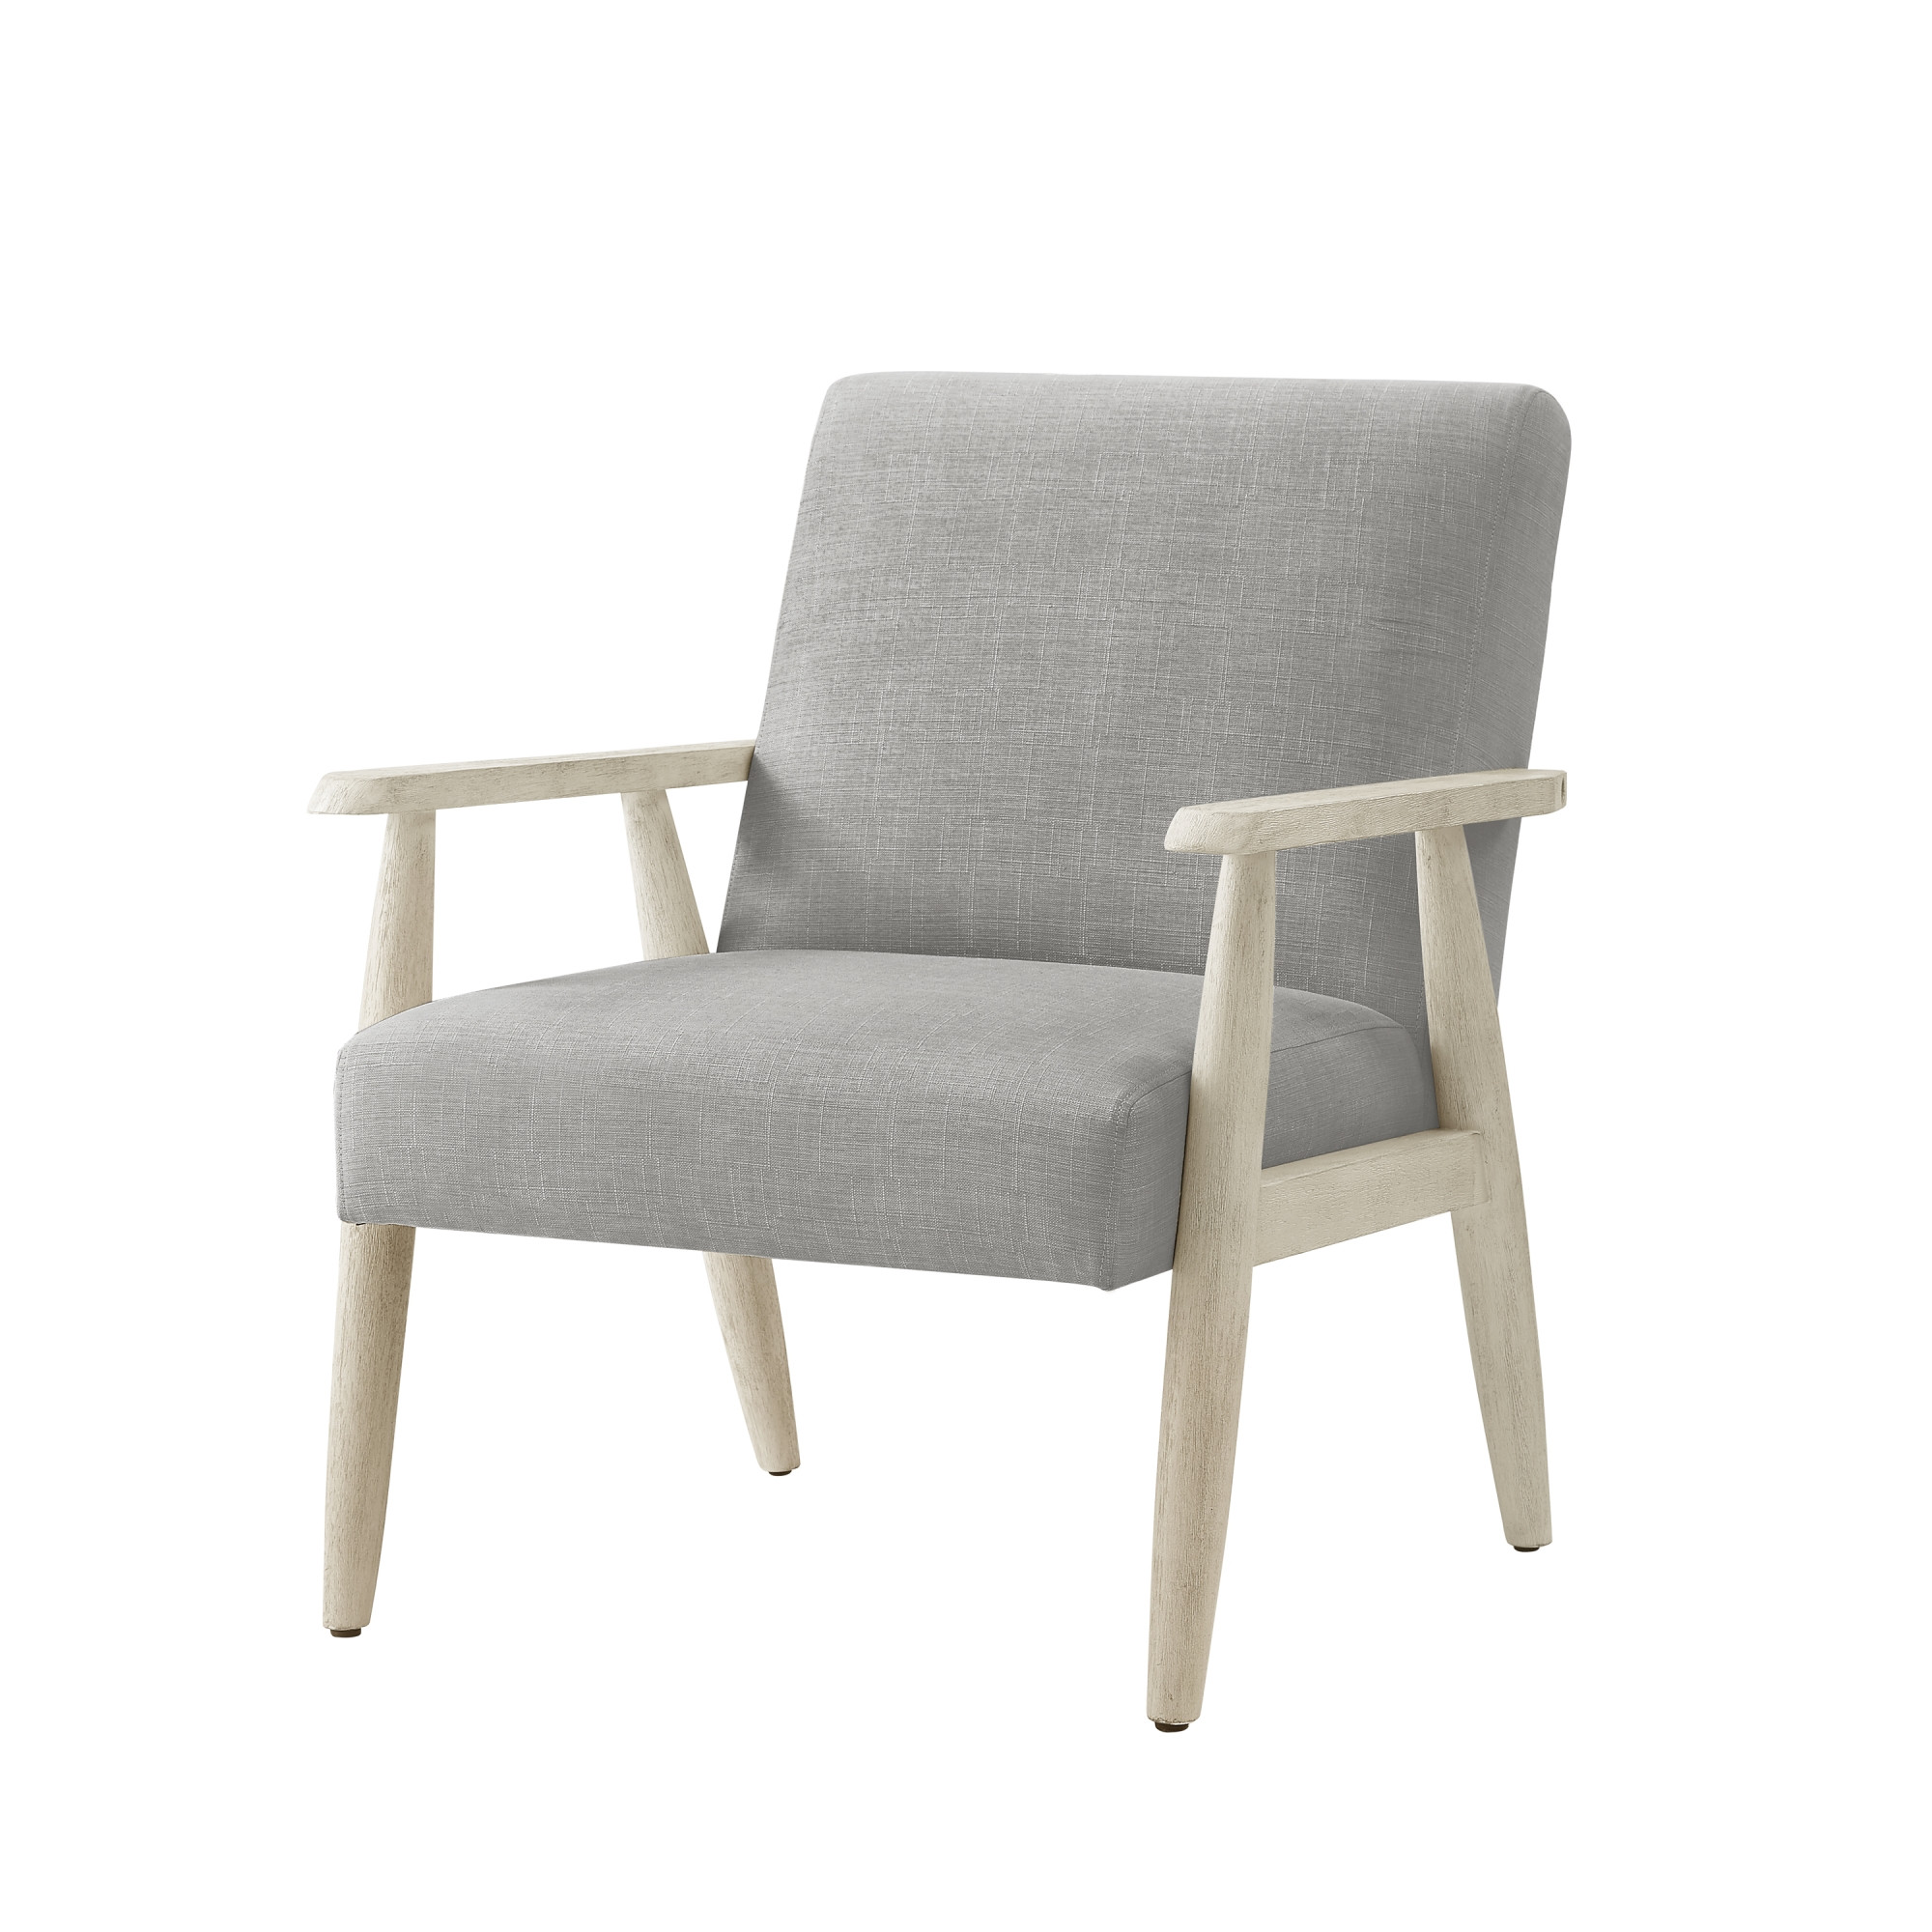 30" Gray And Cream Linen Arm Chair-533963-1